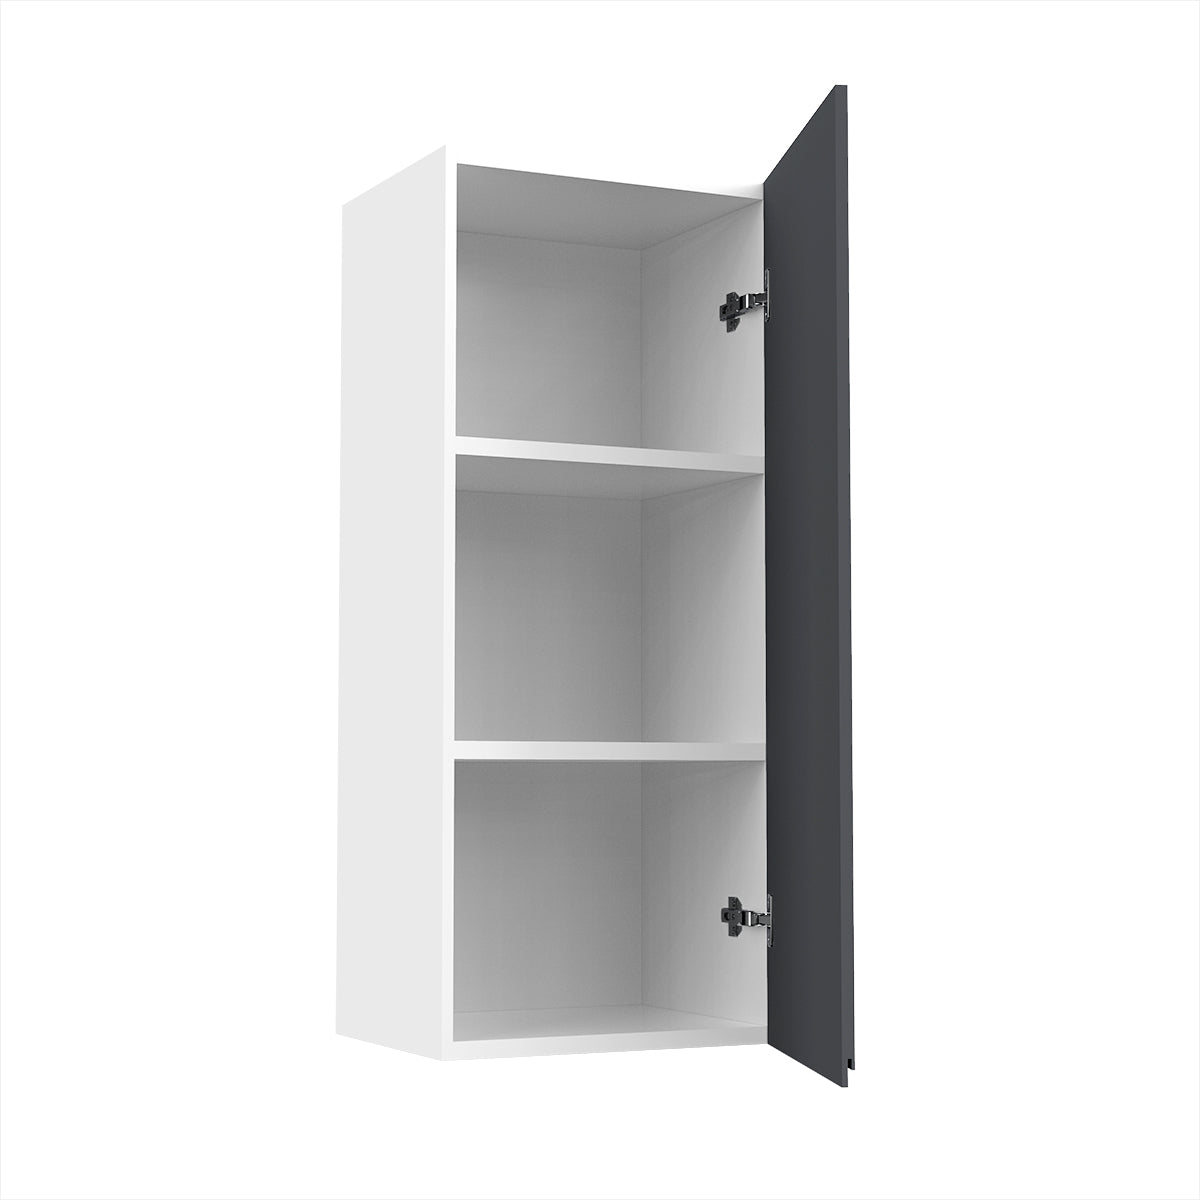 RTA - Lacquer Grey - Single Door Wall Cabinets | 15"W x 36"H x 12"D